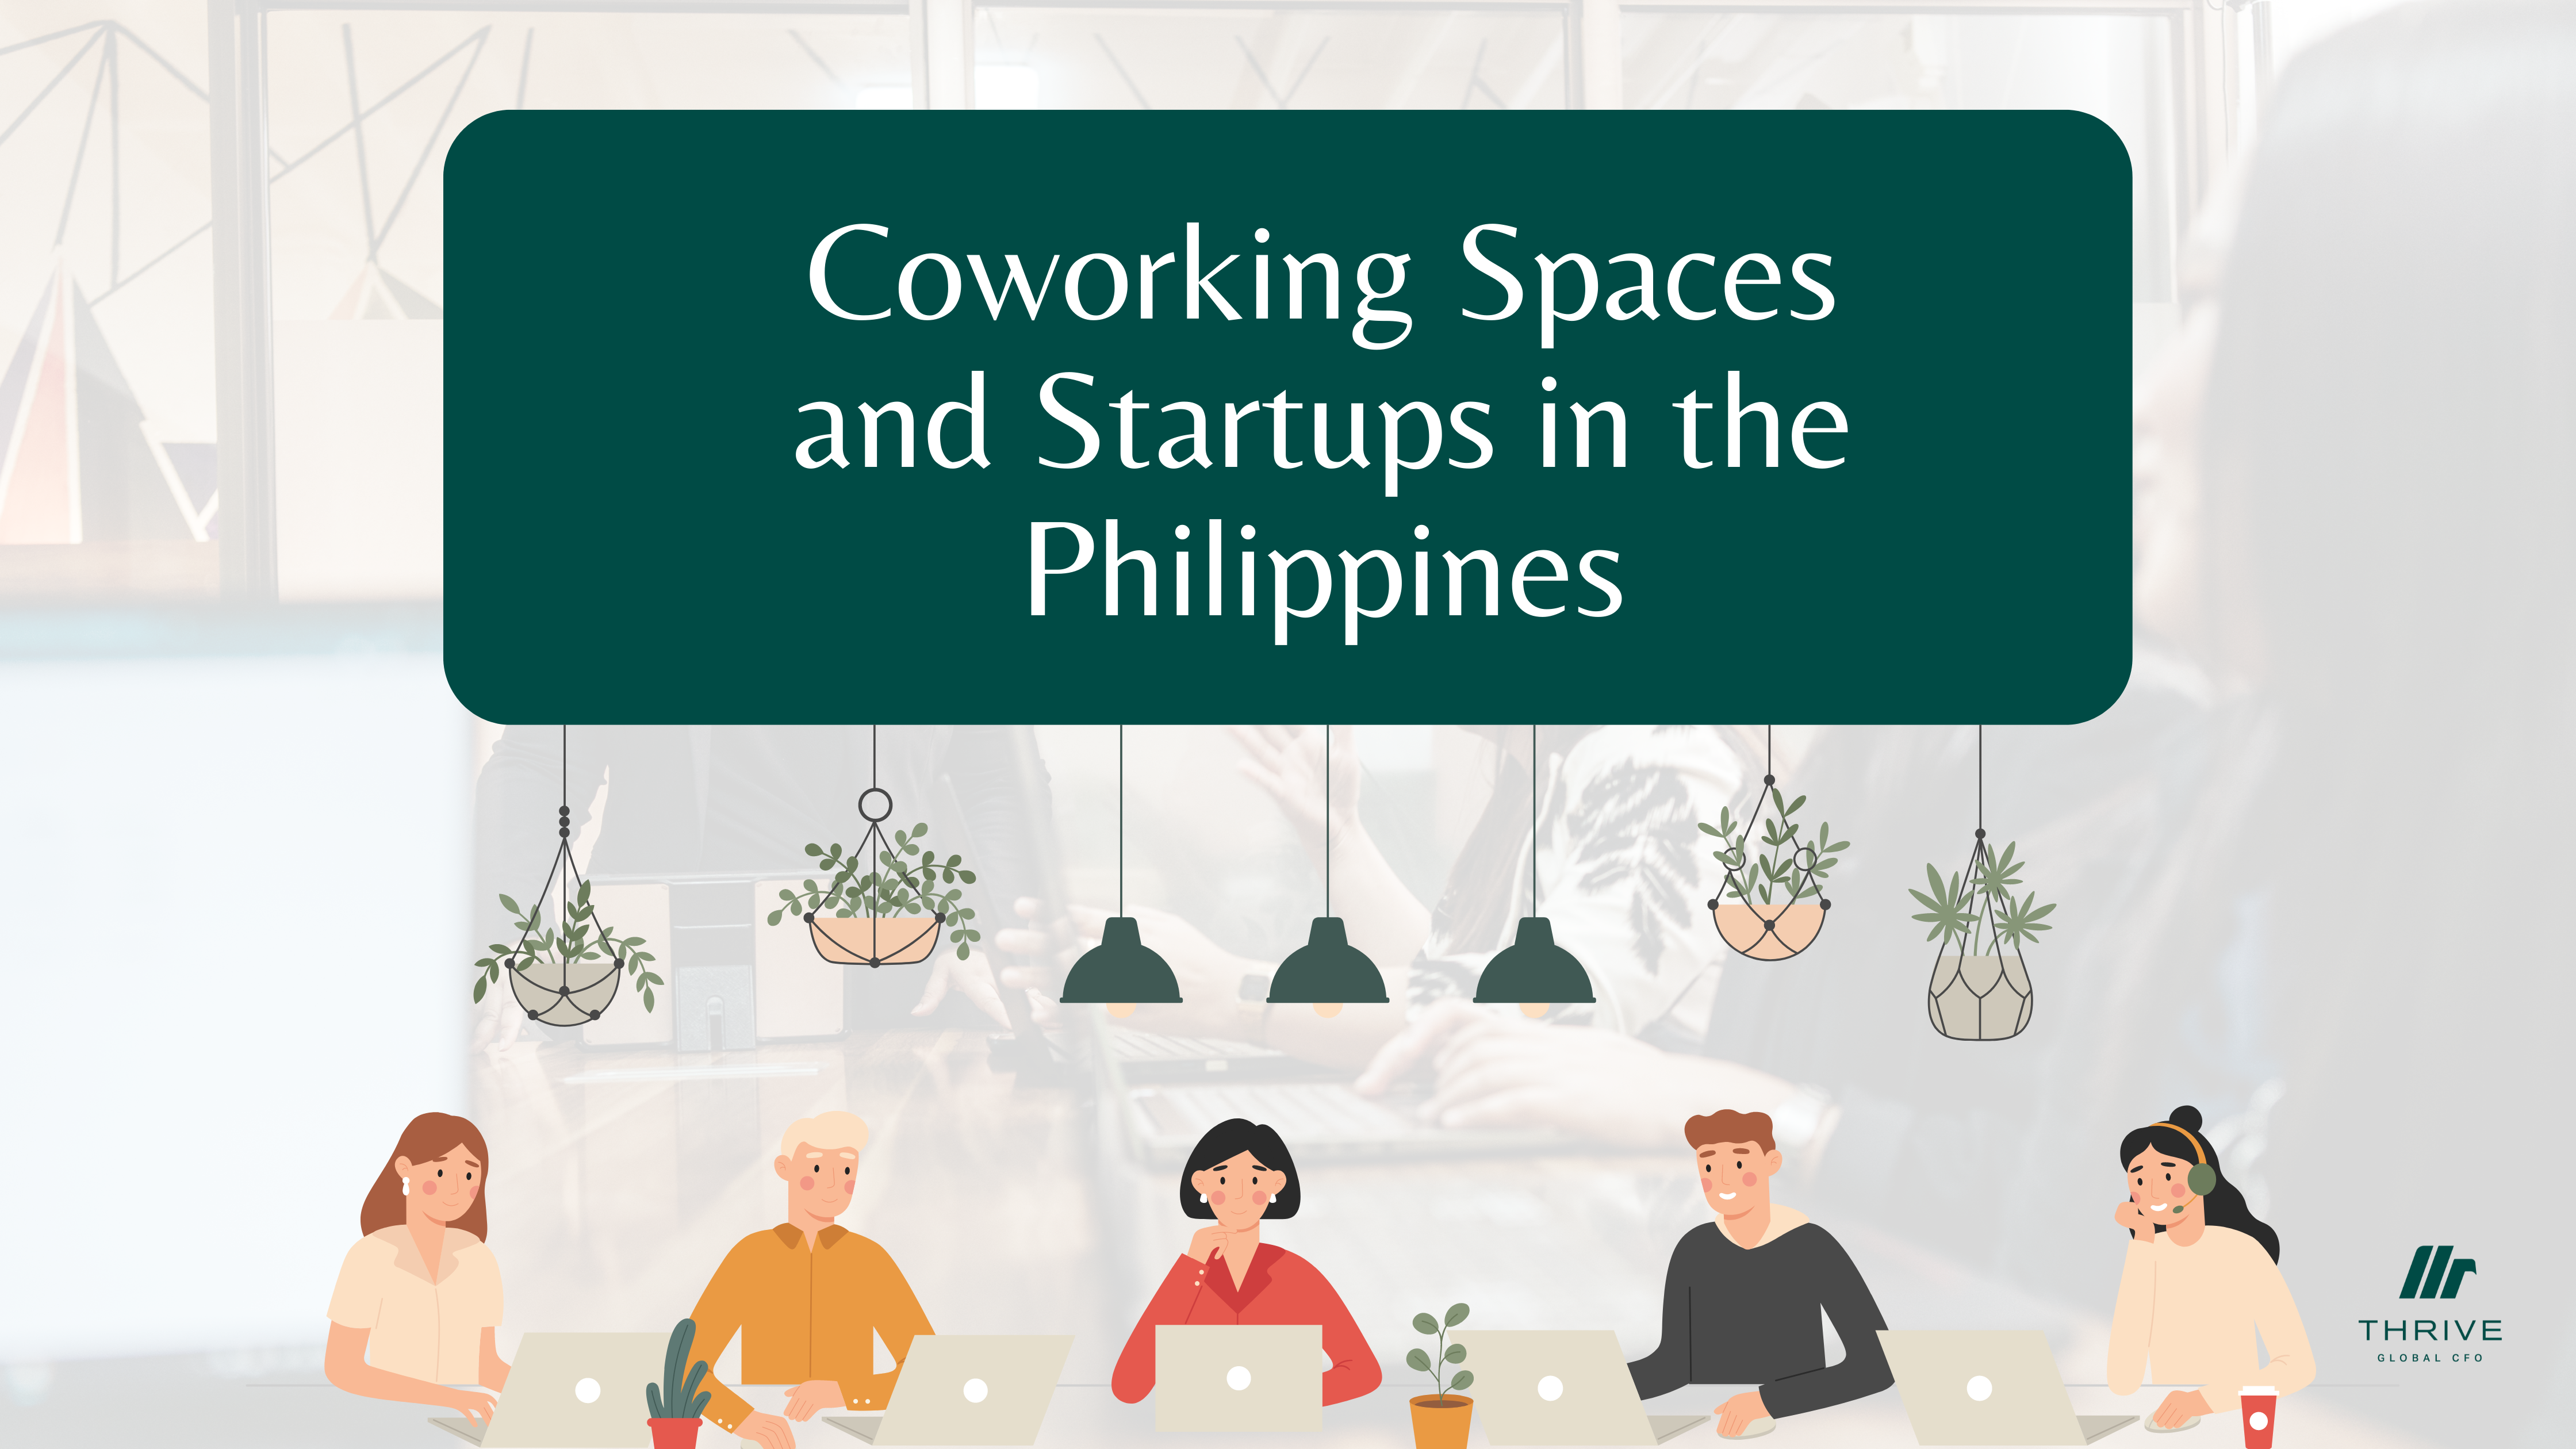 Coworking Spaces and Startups in the Philippines